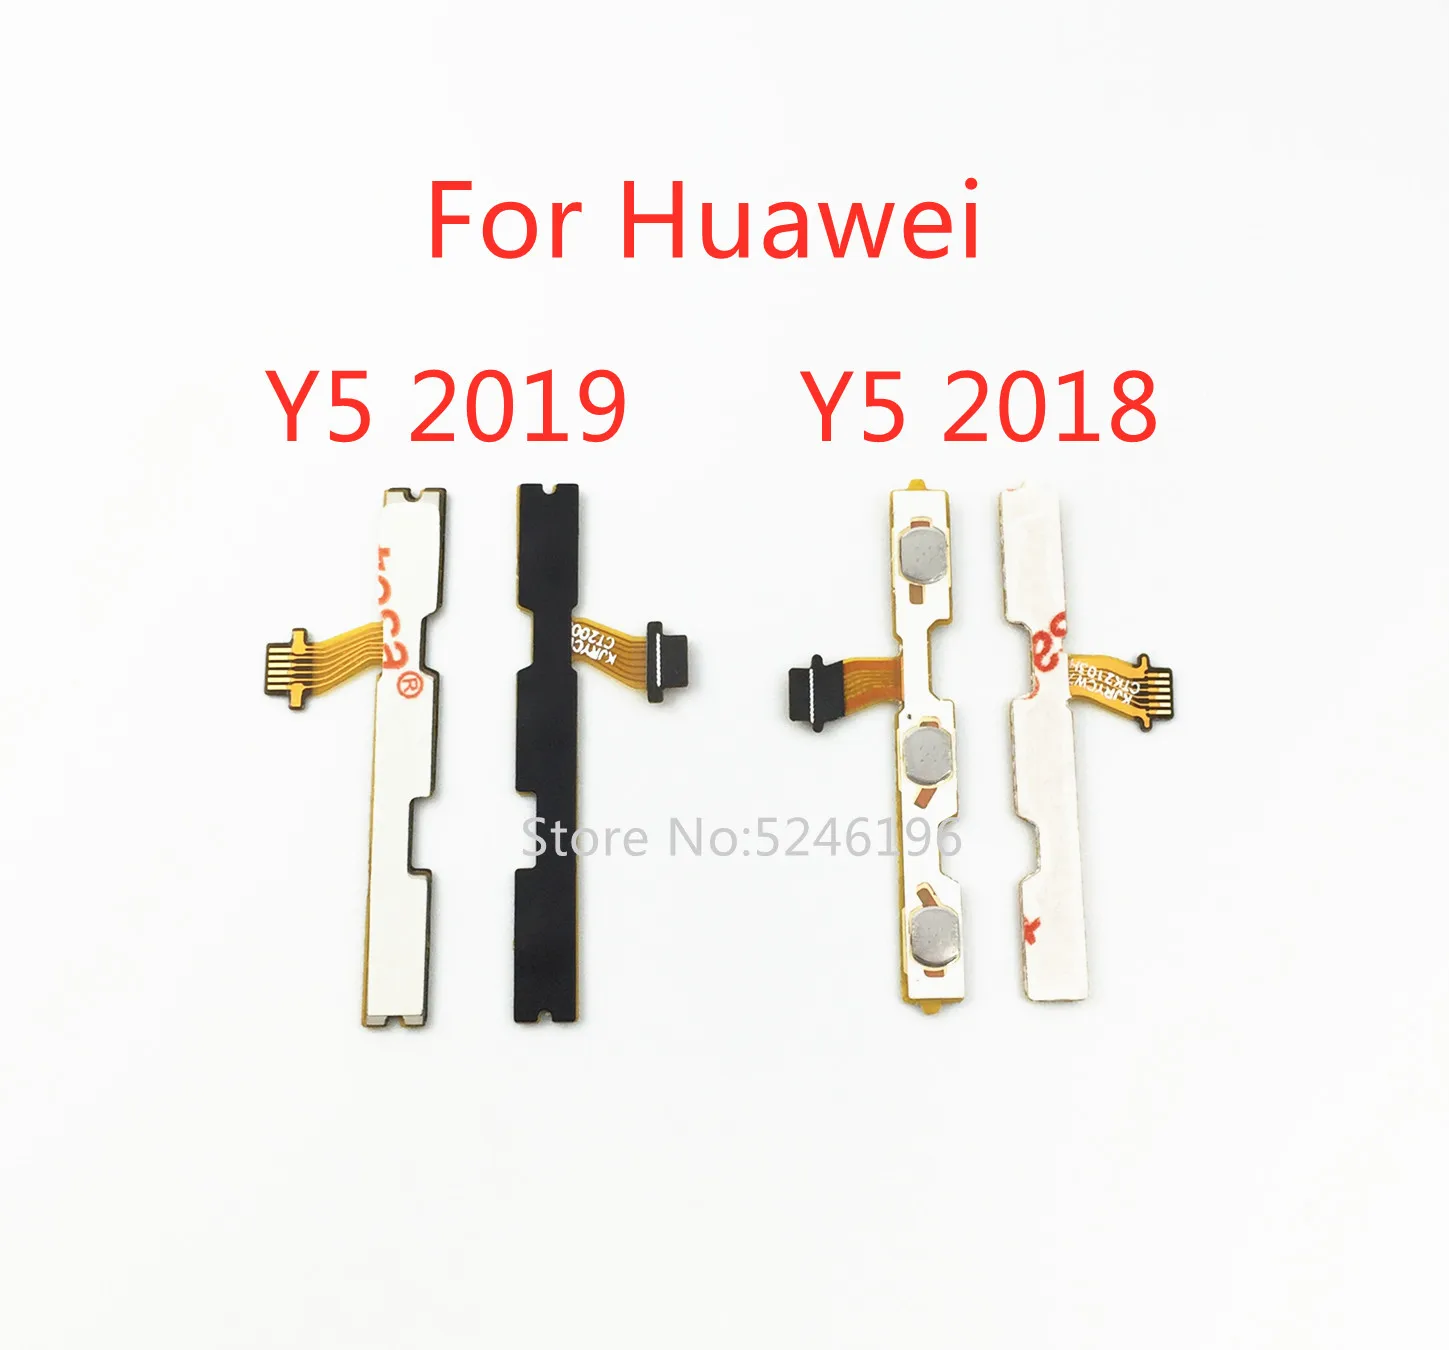 

Applicable to For Huawei Y5 Prime Lite 2017 2018 2019 Switch Power On / Off key Mute Volume Button Ribbon Flex Cable Replacement